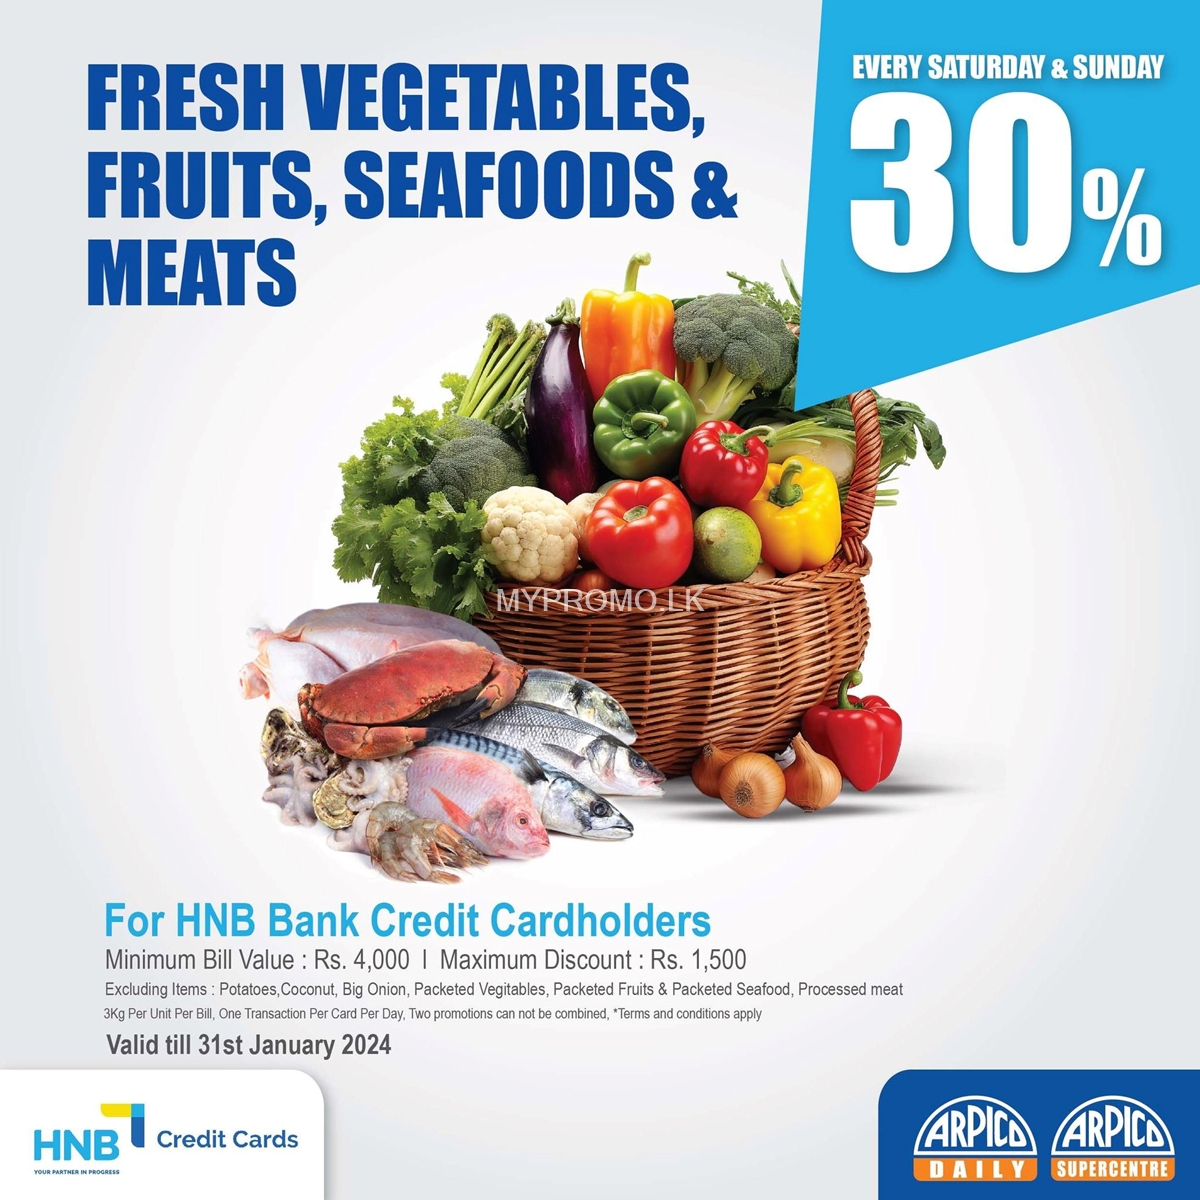 Enjoy 30% savings on fruits, vegetables, seafood, & Meats at Arpico Super Centre with HNB bank Credit Cards